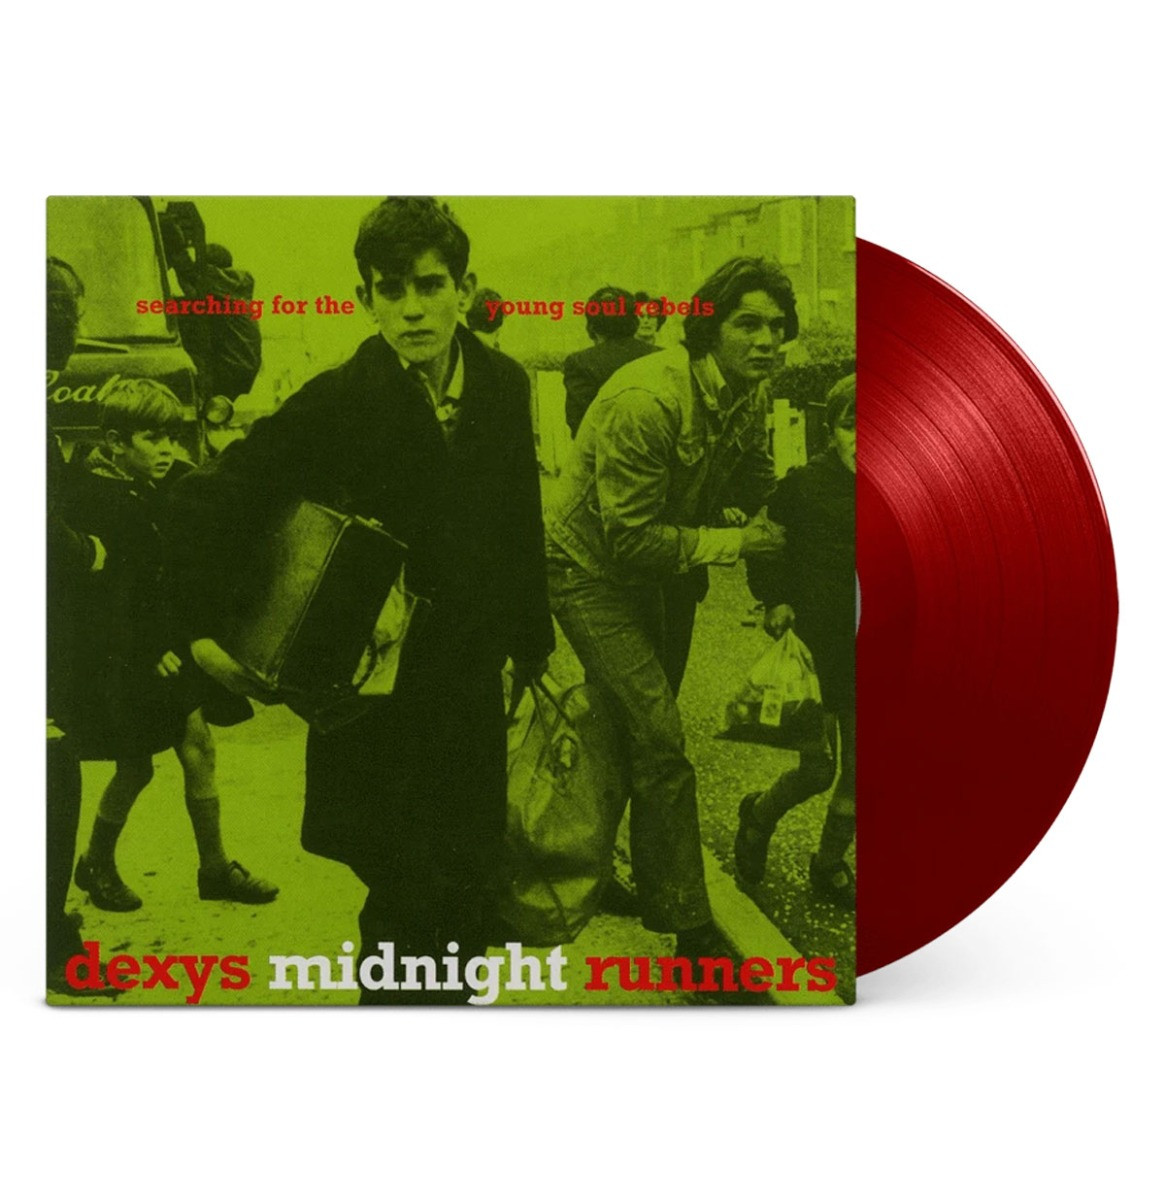 Searching For The Young Soul Rebels - Dexys Midnight Runners LP - Beperkte Oplage